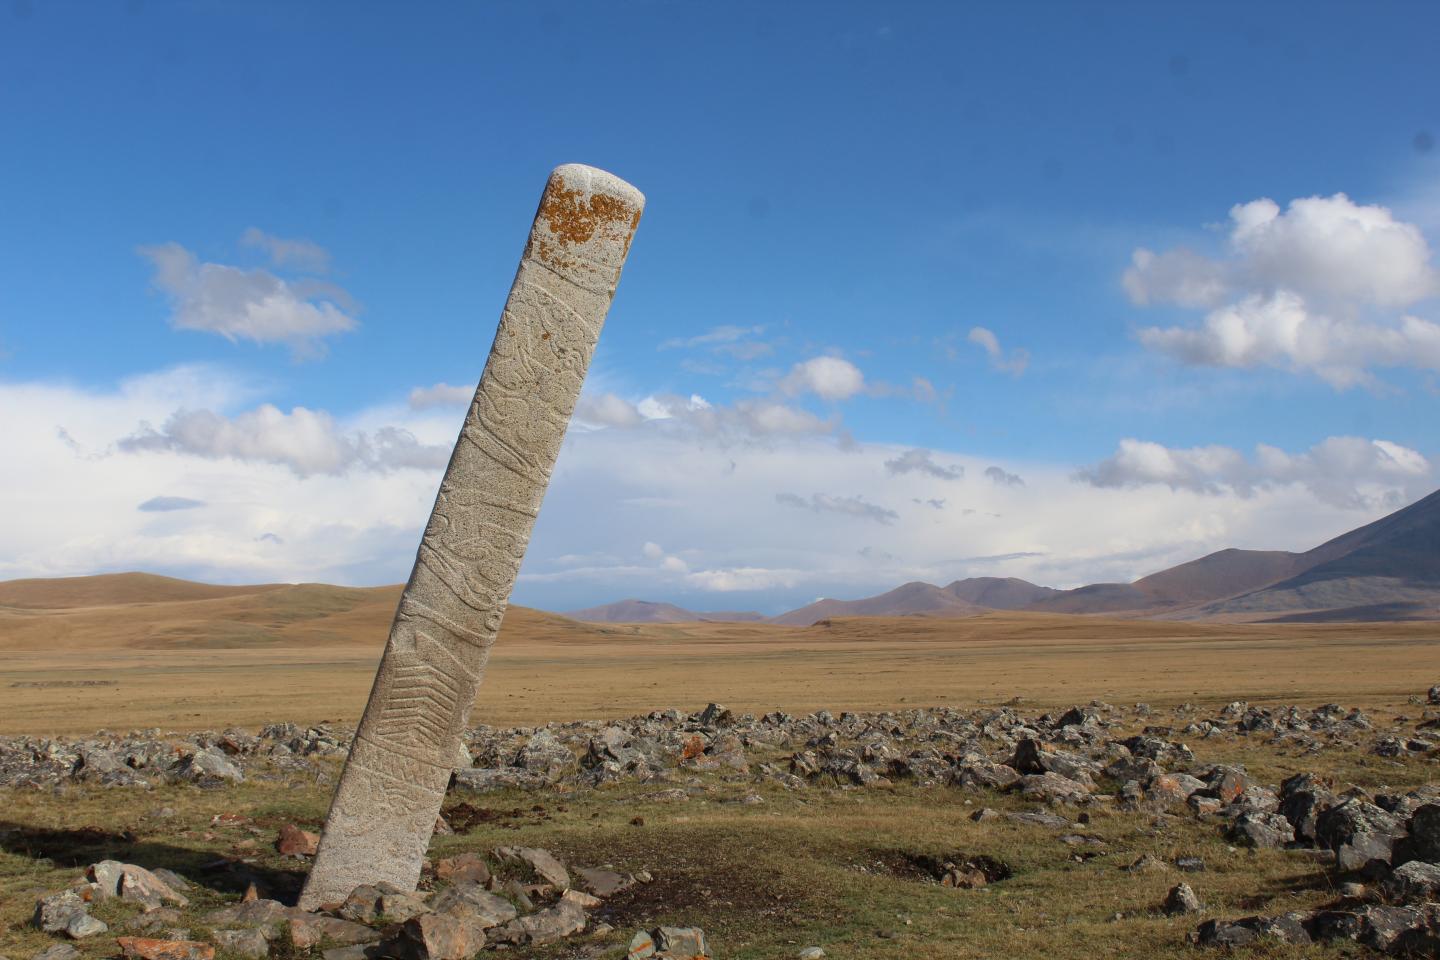 A leaning Deer Stone placed in central Mongolia.